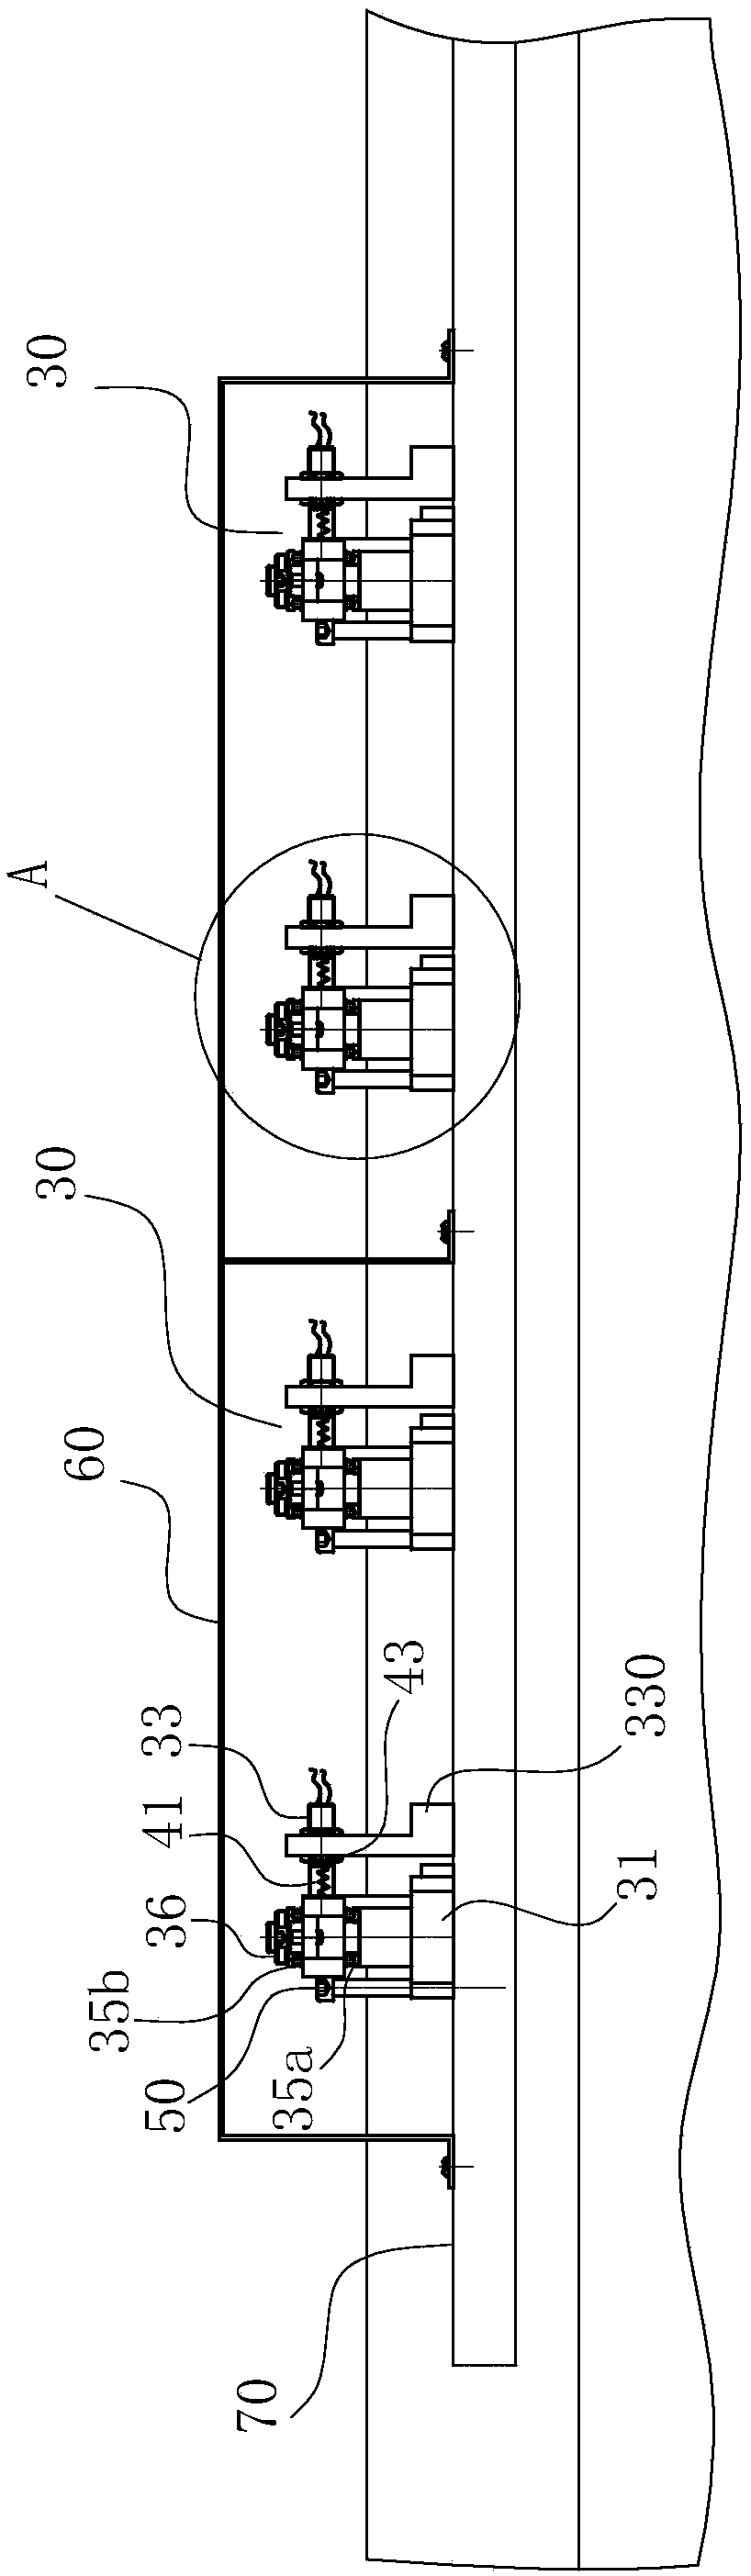 Detecting device for multi-workpiece broaching production line